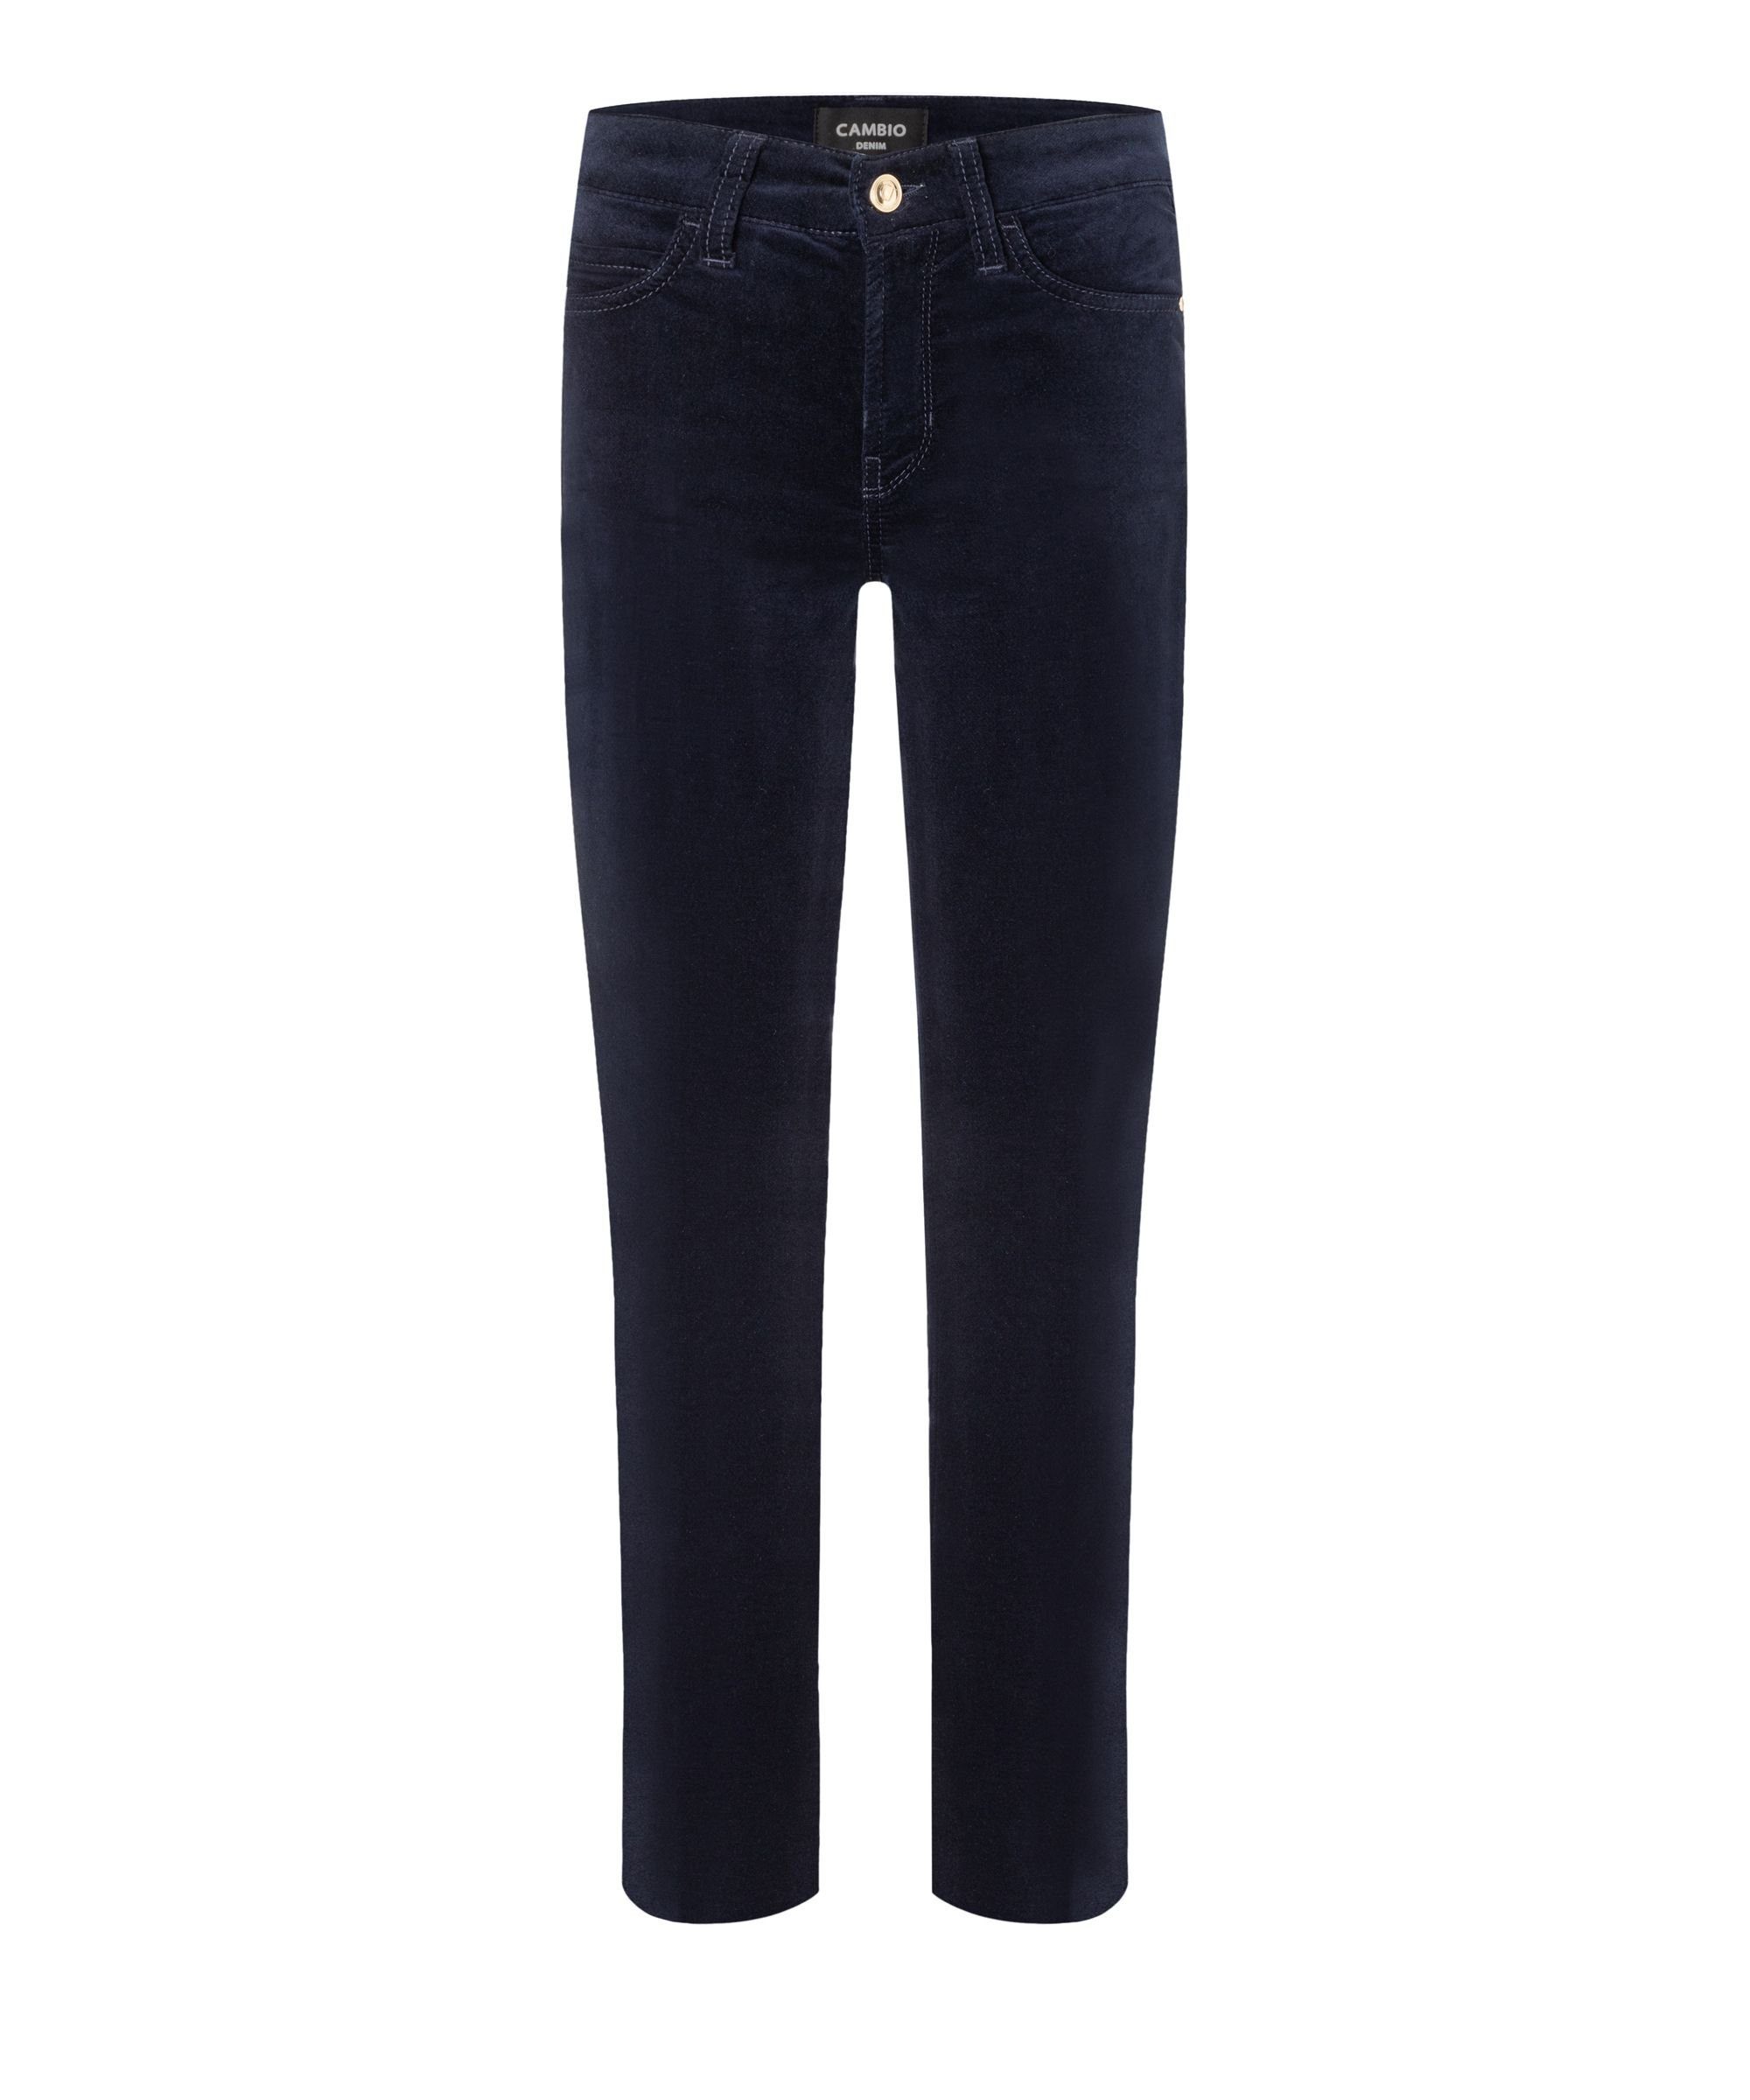 Cambio 5-Pocket-Jeans pure night | Jeans